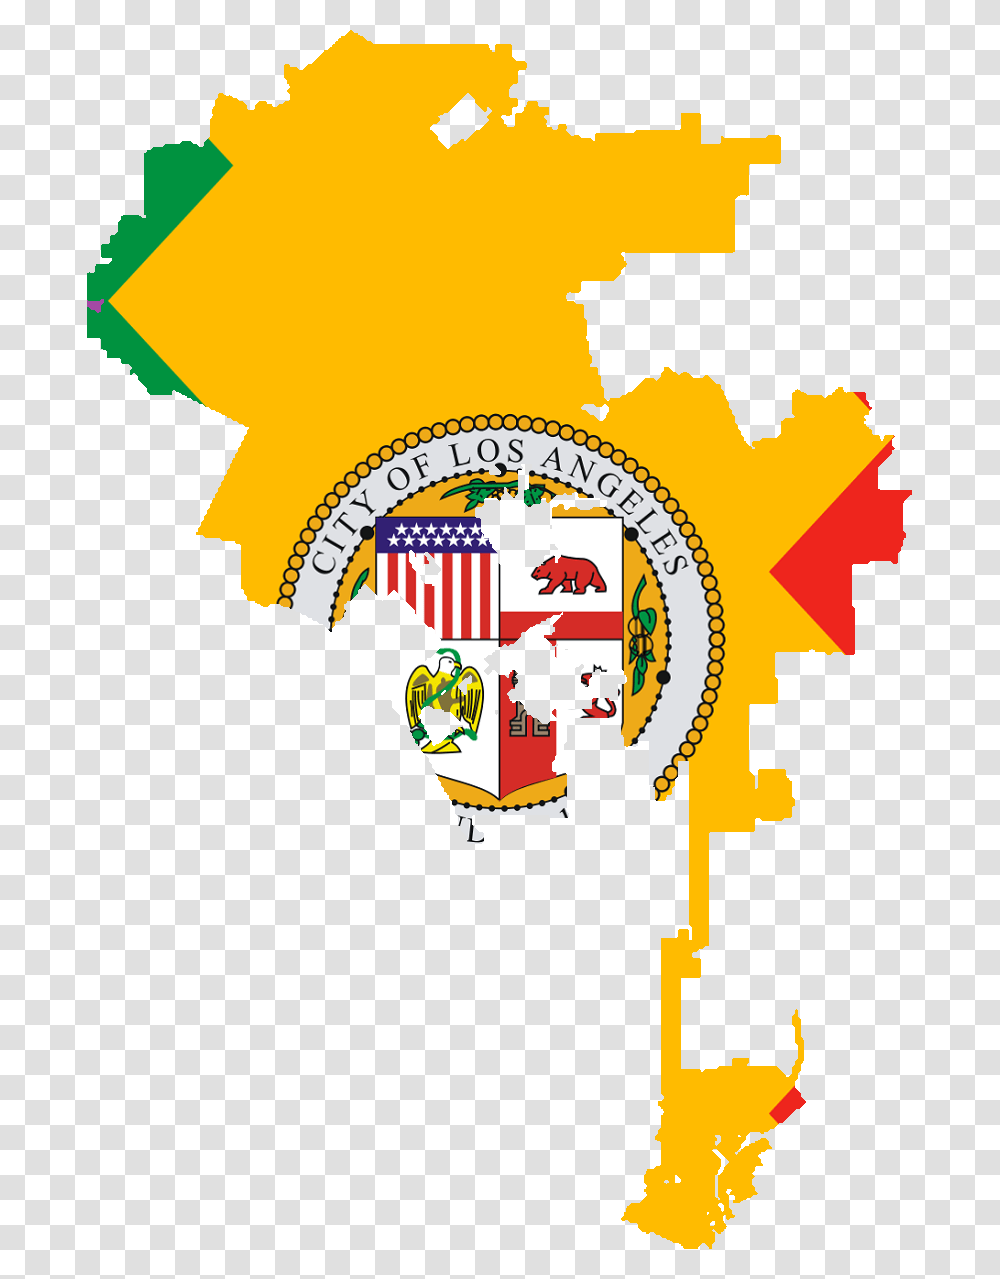 Flag Map Of Los Angeles California Los Angeles Flag Map, Poster, Advertisement Transparent Png